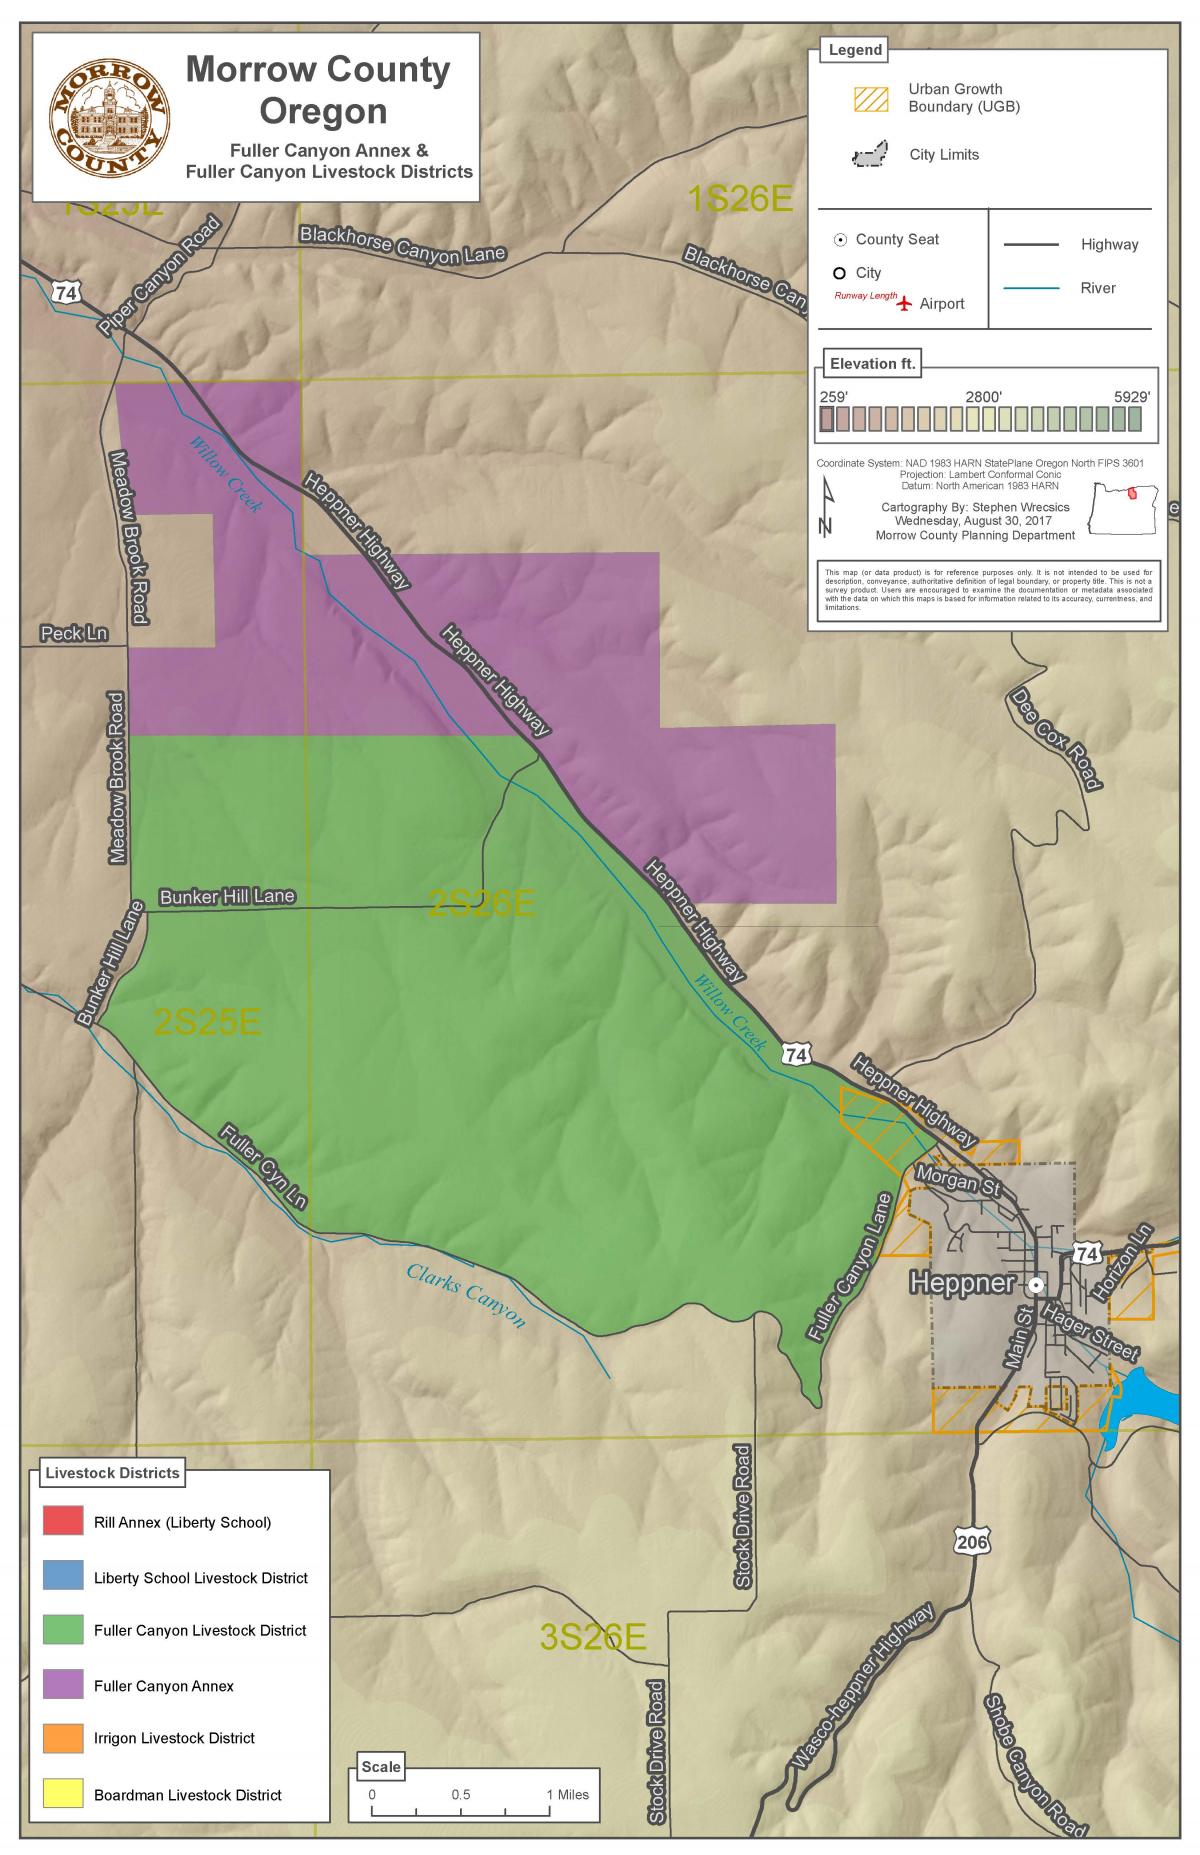 Fuller Canyon Livestock District and Annex